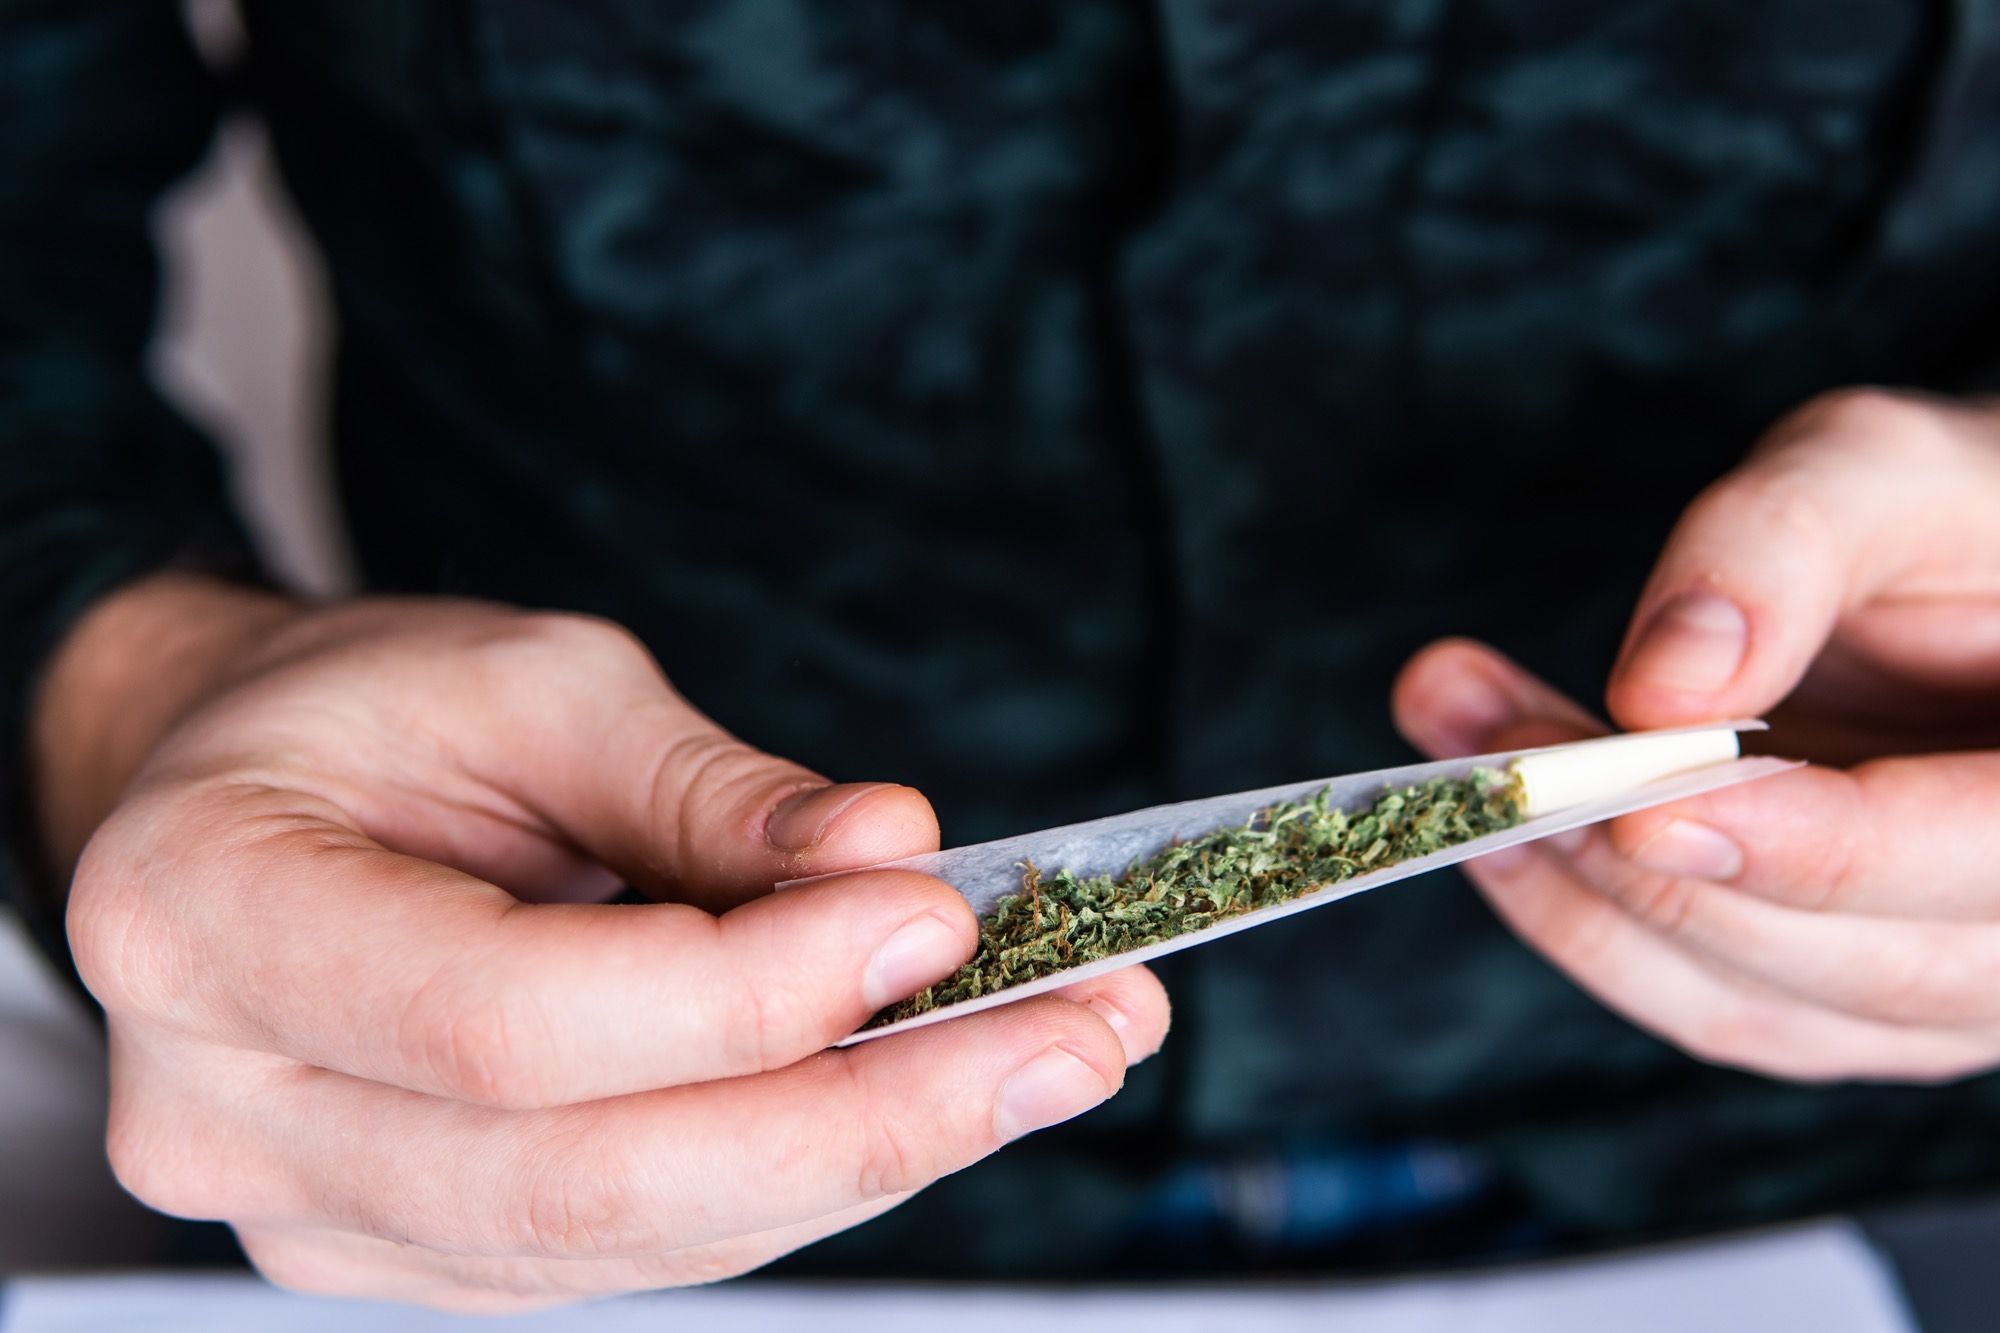 consumer rolling cannabis joint amid THC dosage uncertainty